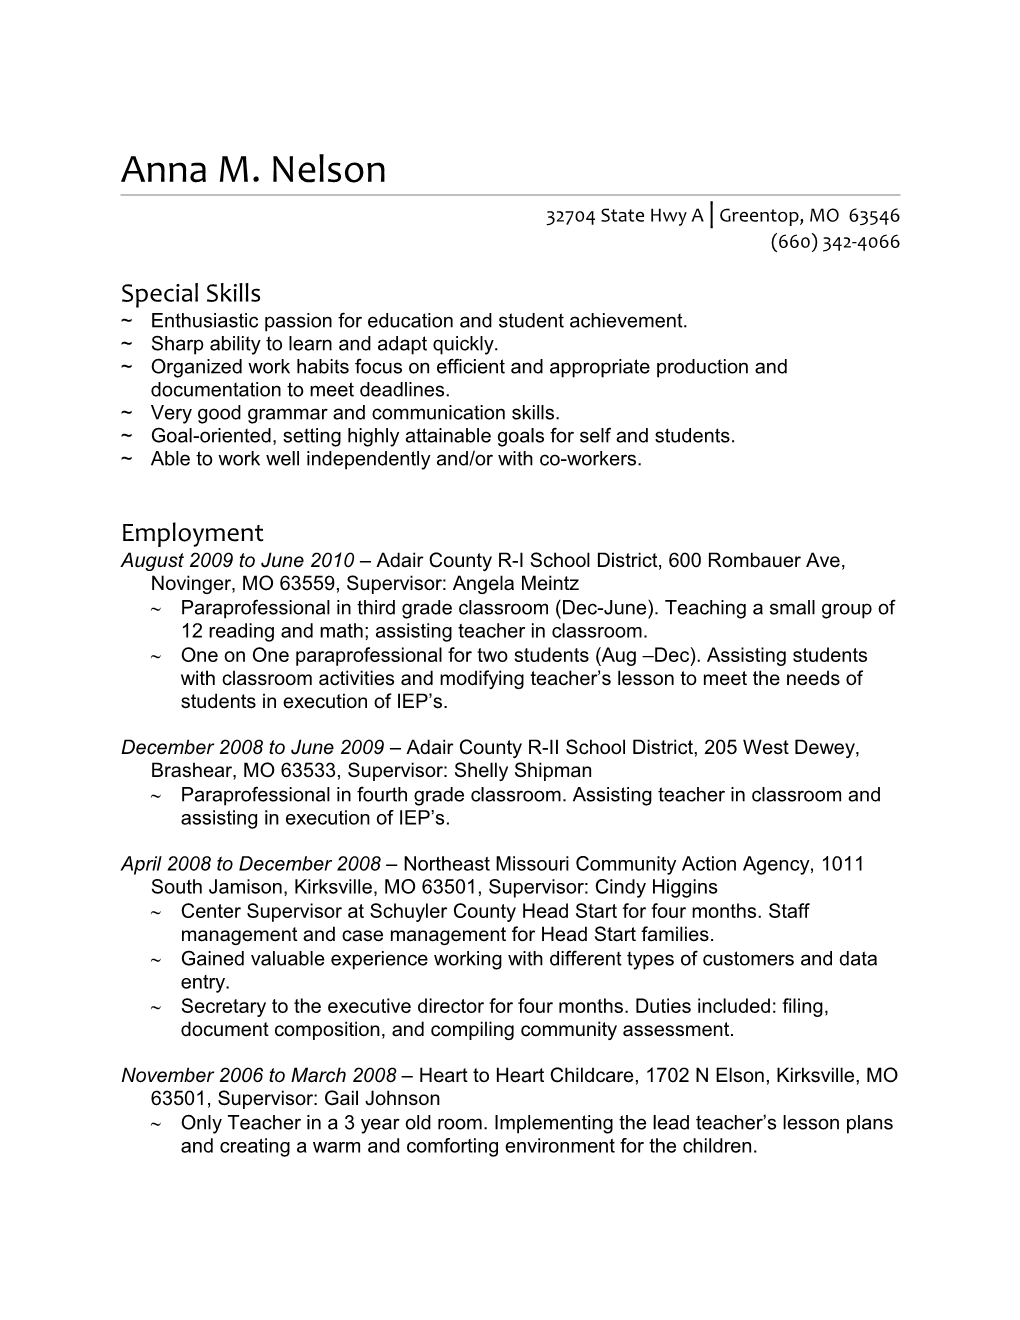 Resume Anna M. Nelson Page 1